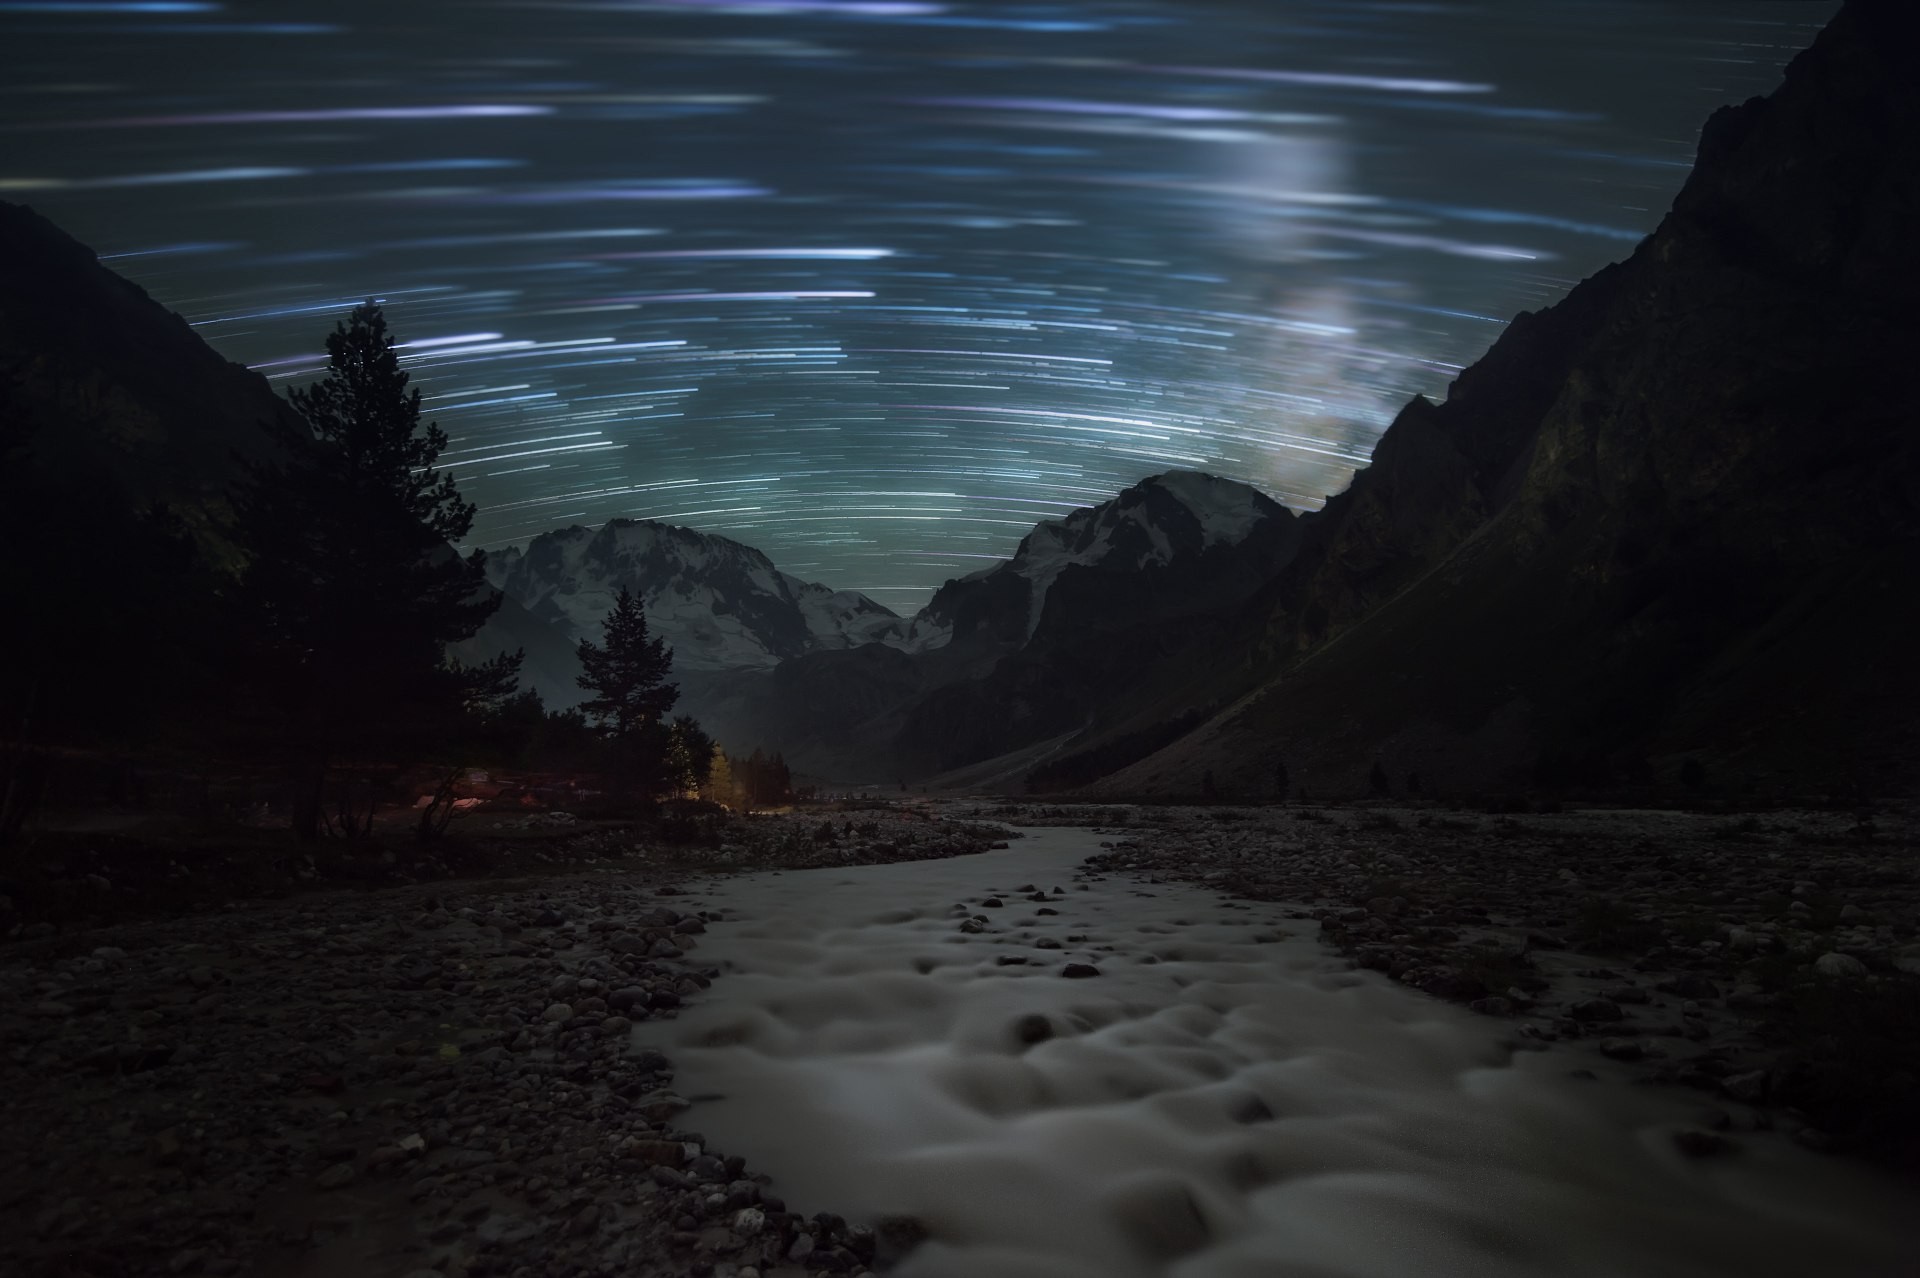 General 1920x1278 space universe stars blurred stones long exposure star trails nature creeks outdoors